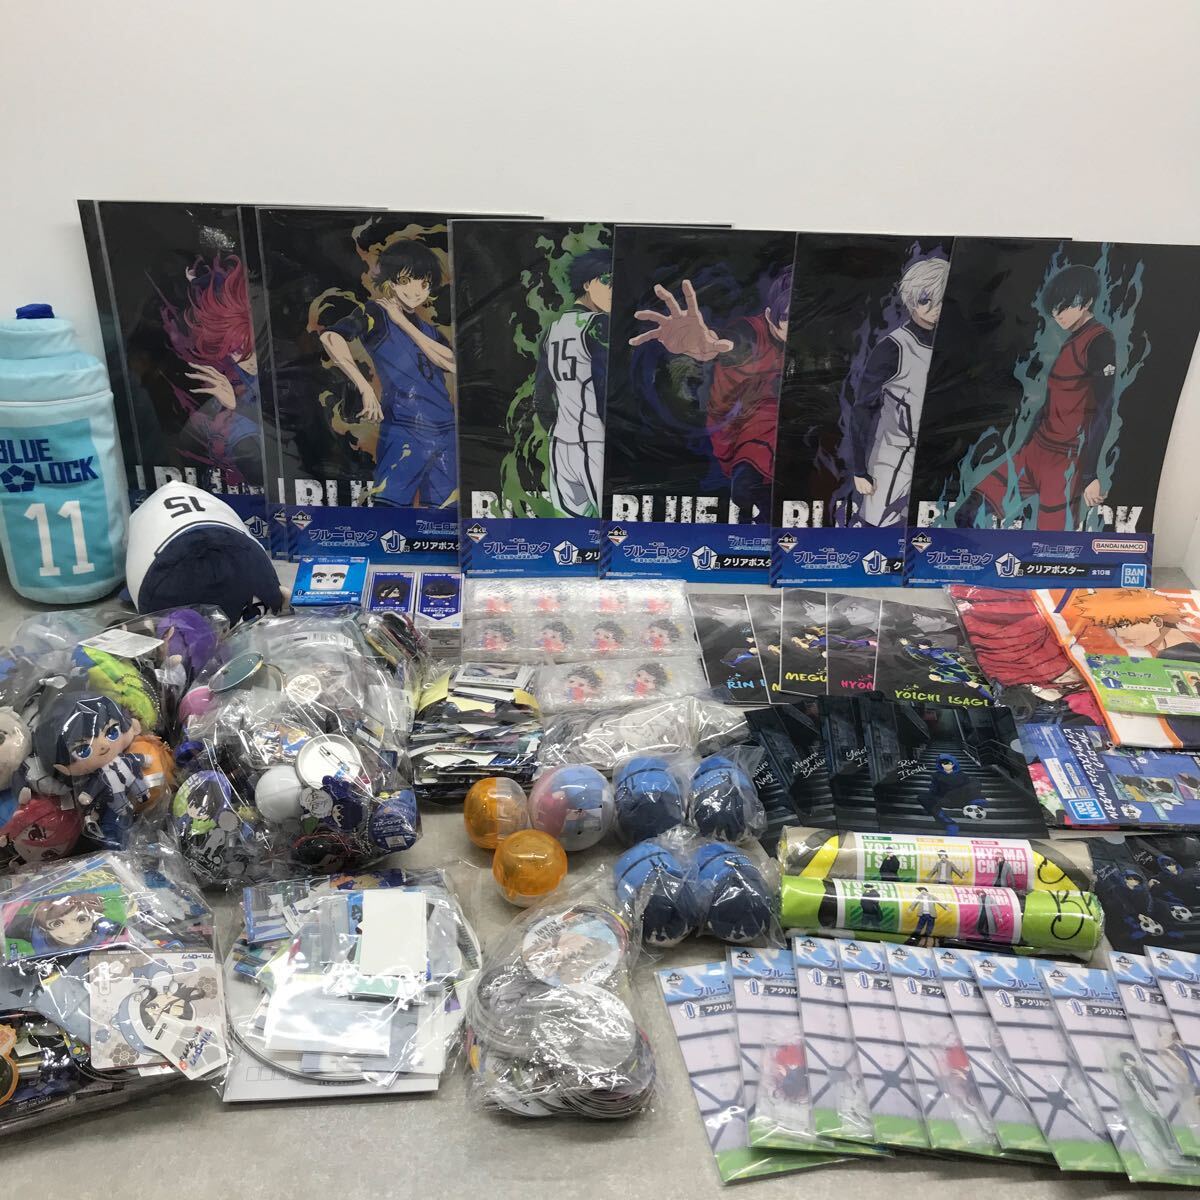 106 B *1 jpy ~* blue lock goods set sale large amount most lot sticker card can badge axe ta mascot [ including in a package un- possible ]